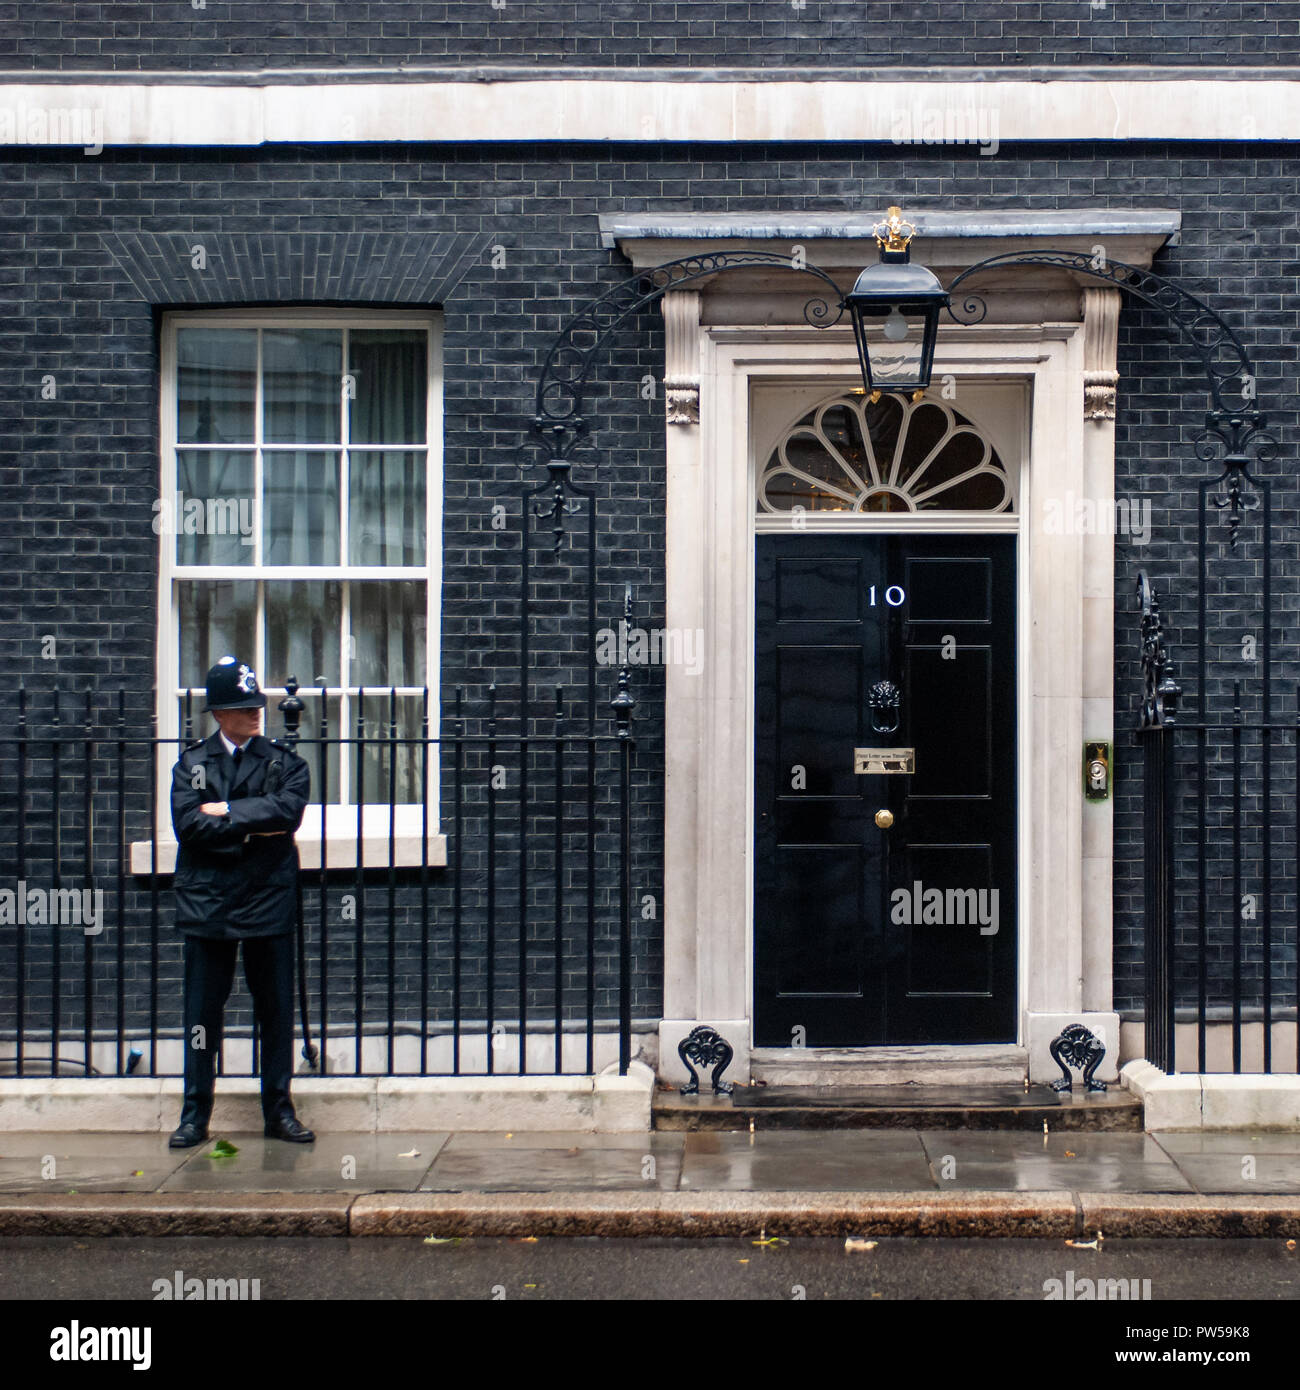 LONDON, UK - SEP 16: Squared image of a police officer guarding the entrance door of 10 Downing Street in London on September 16, 2013 Stock Photo